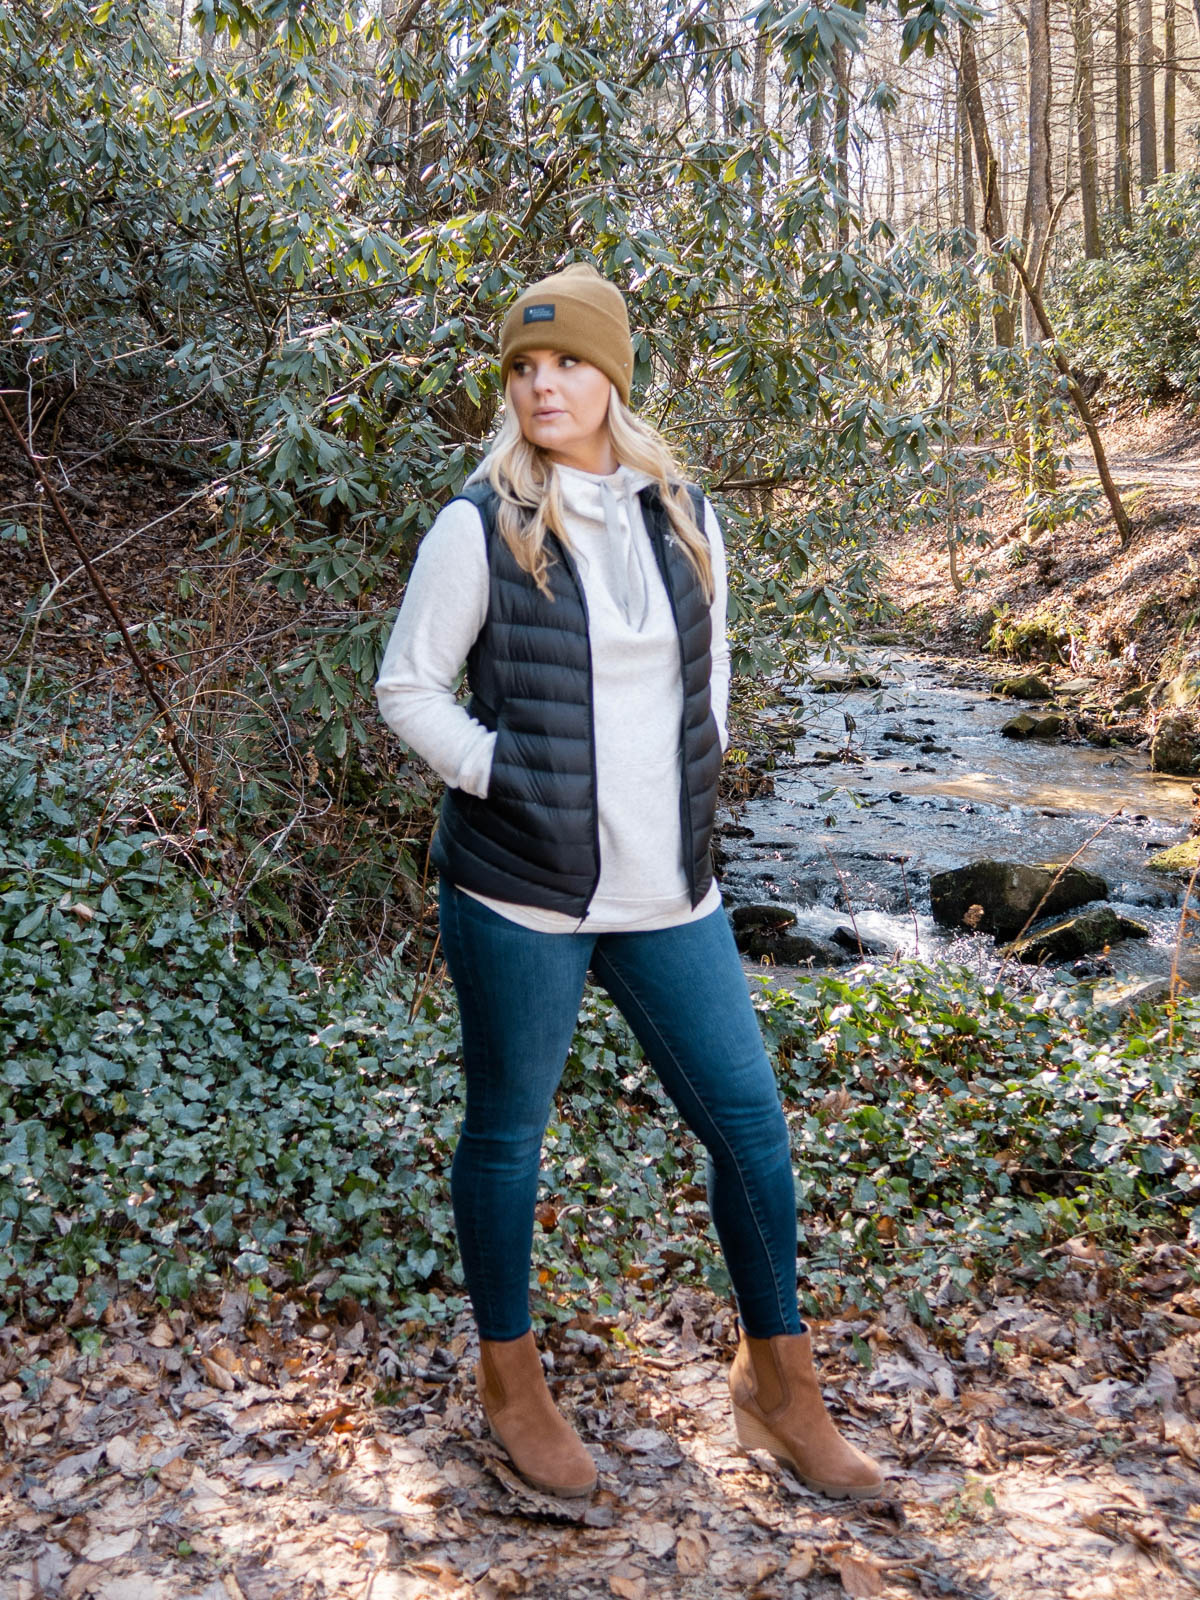 Cristin Cooper for Backcountry. Cold weather and winter favorite clothes. 